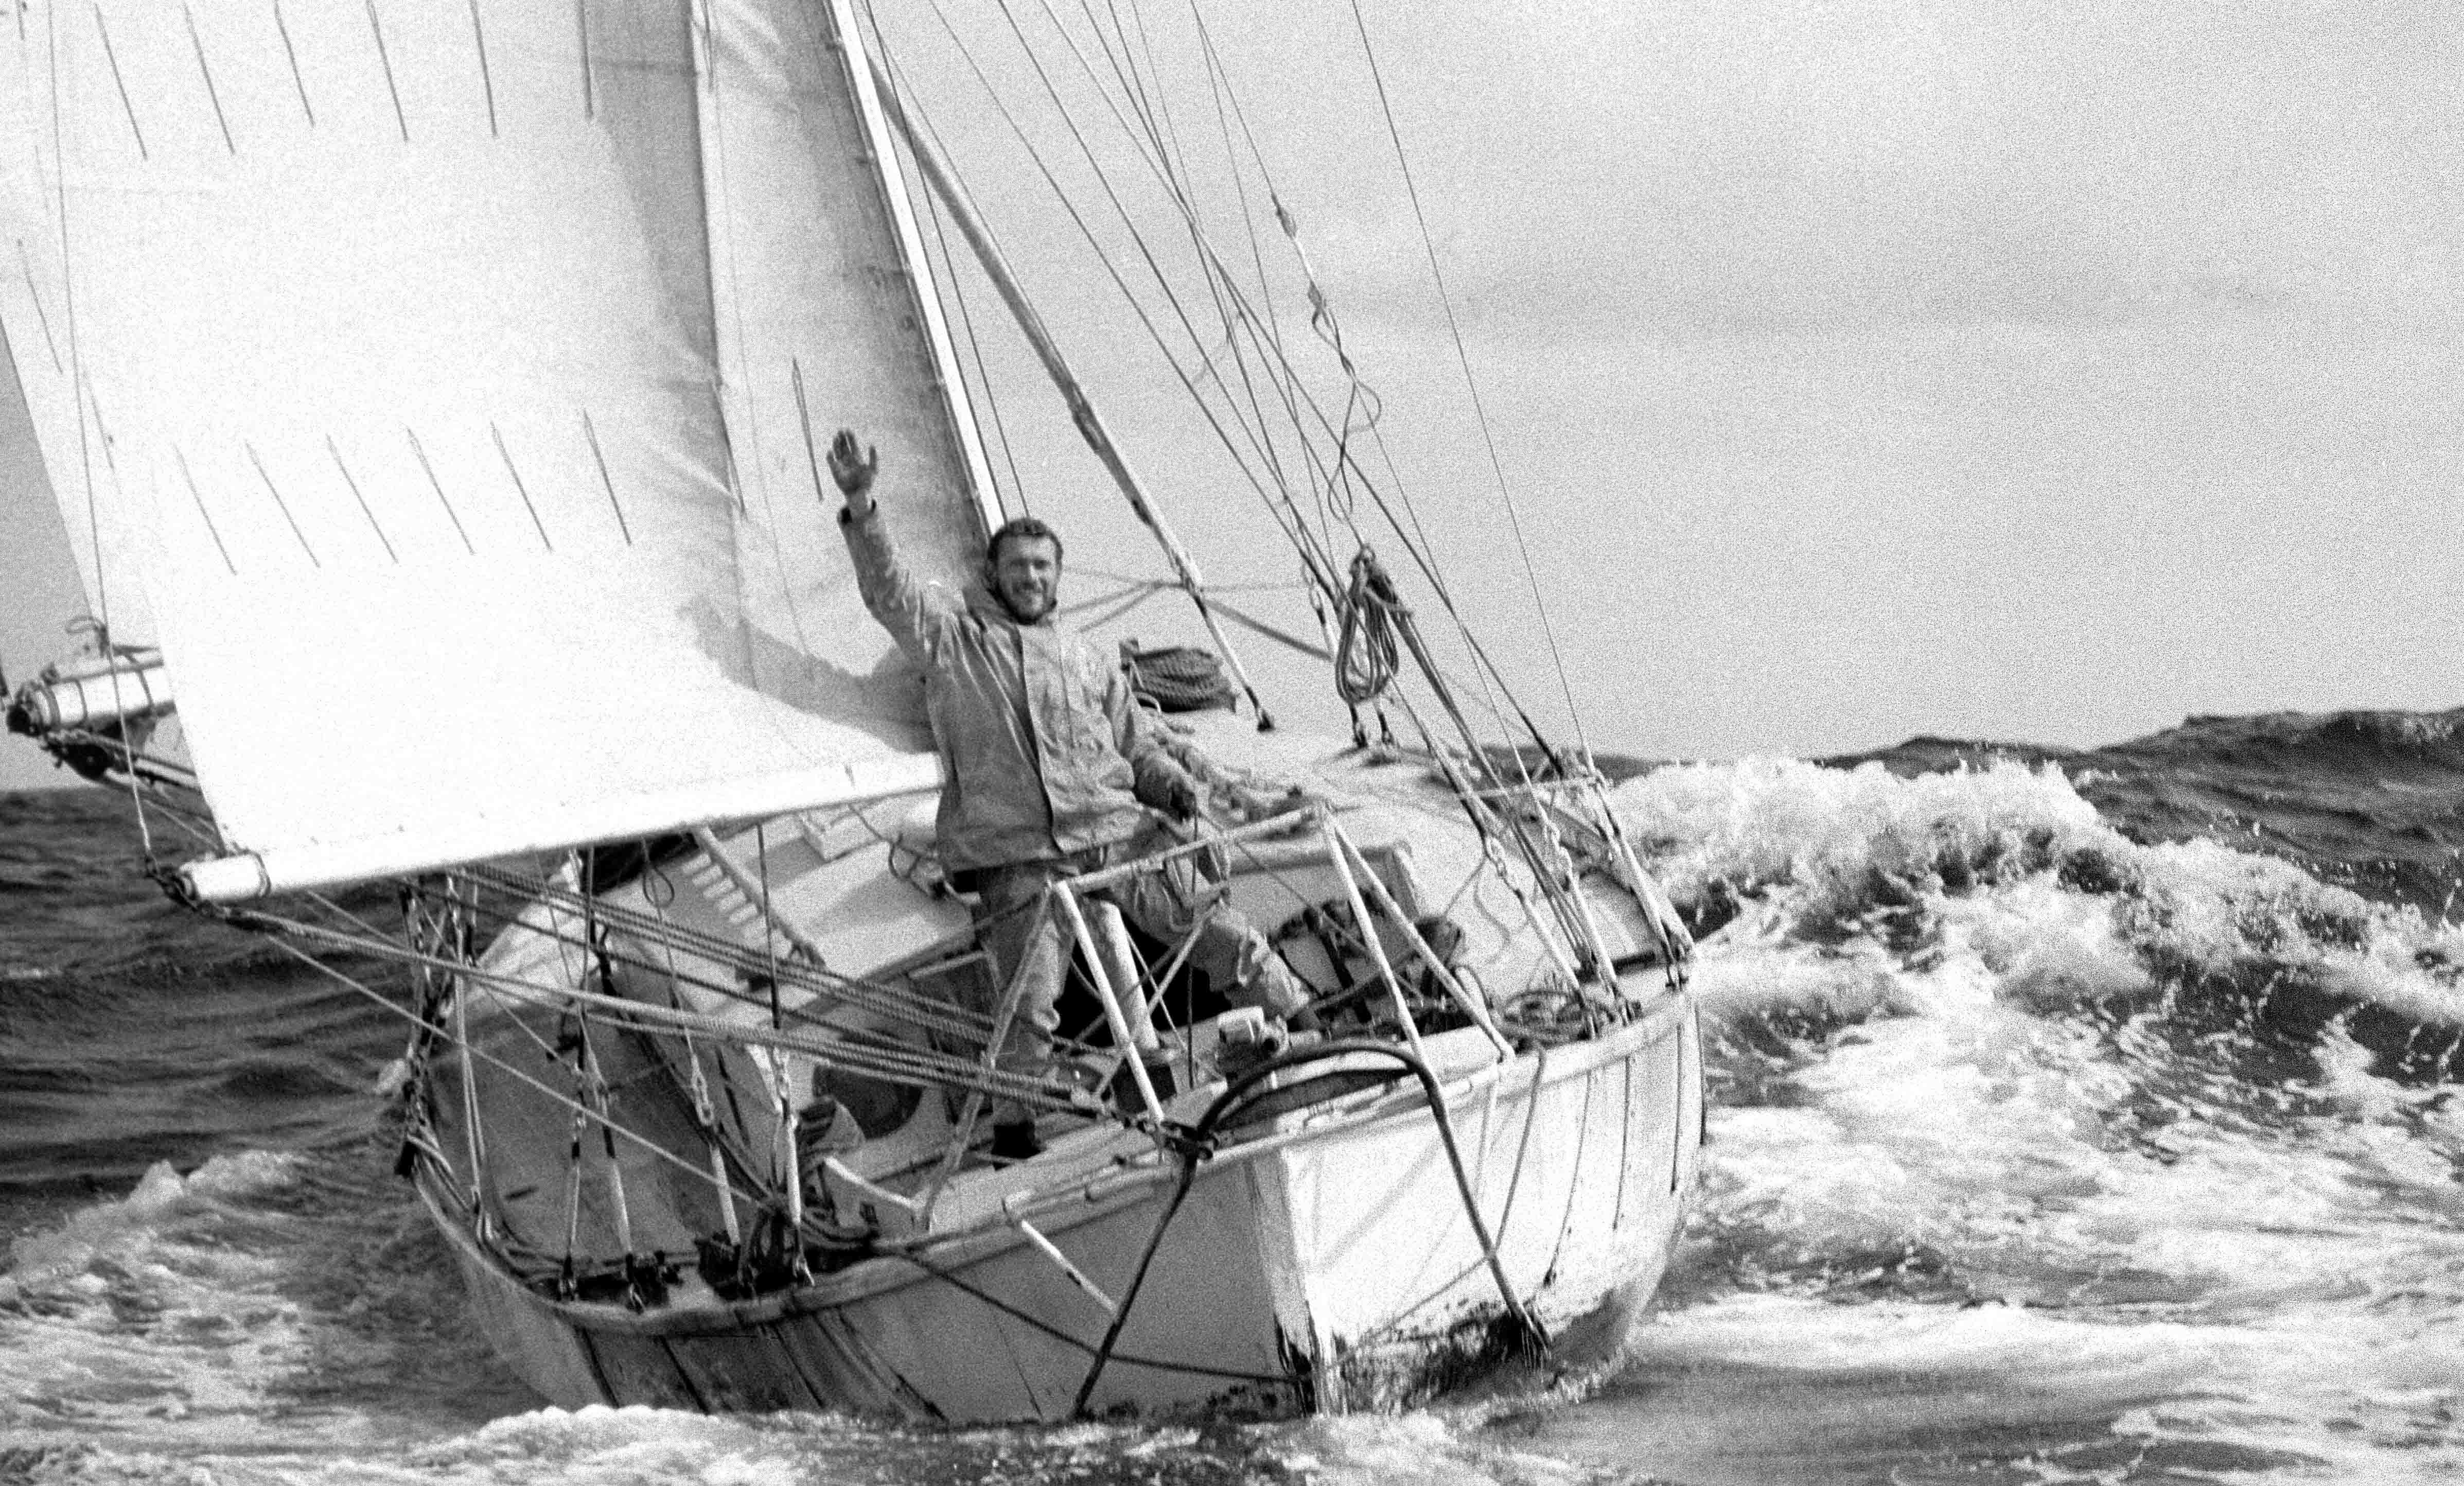 47 years on from Sir Robin Knox-Johnston's Golden Globe historic achievement